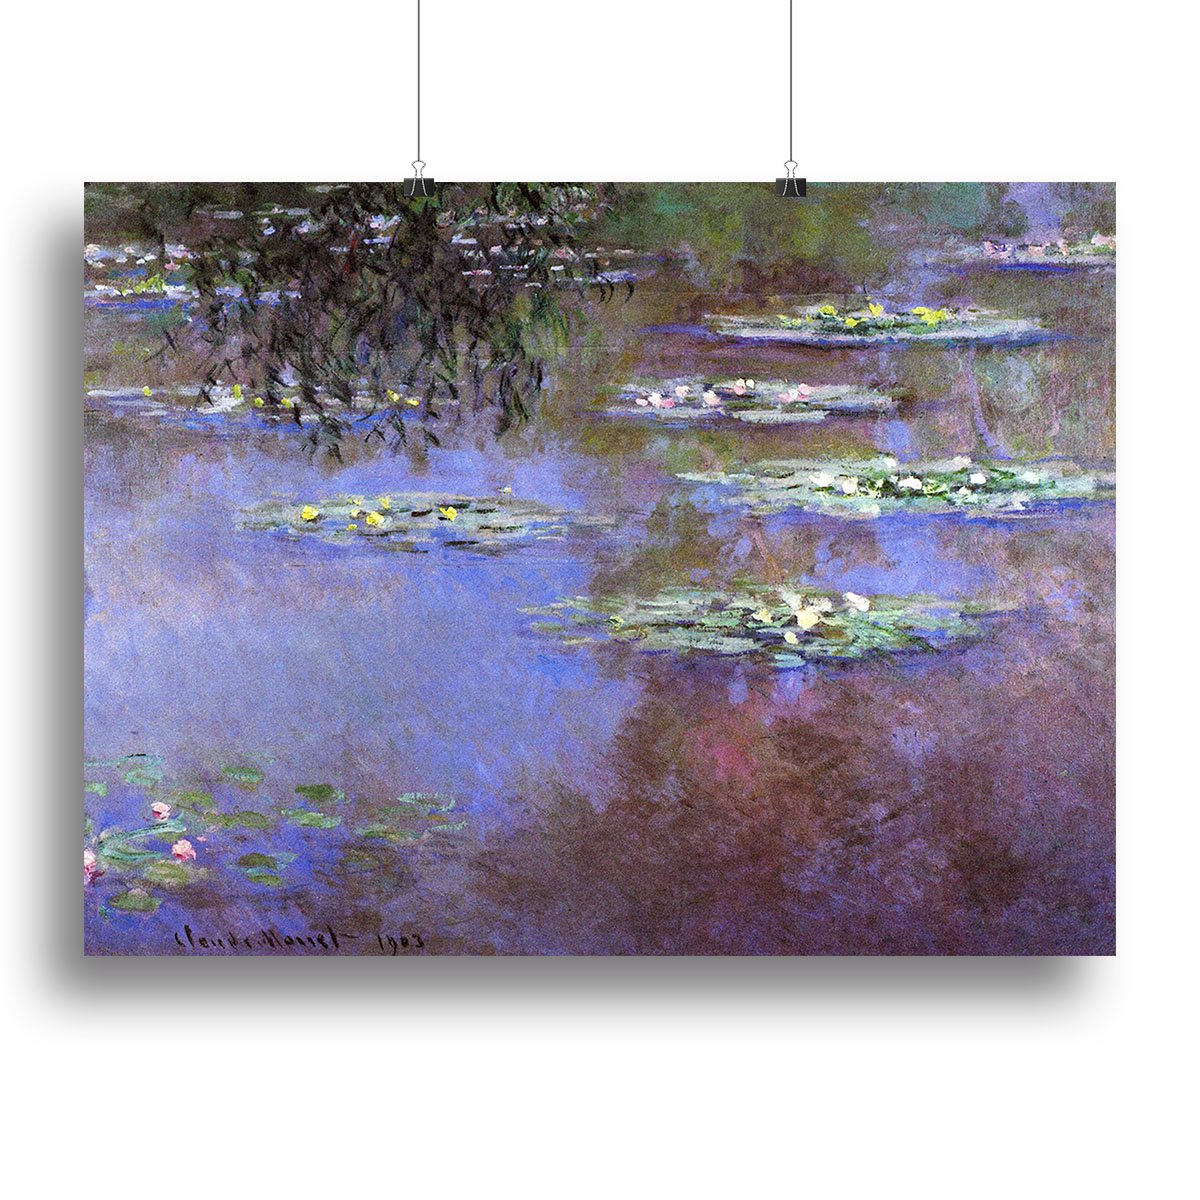 Sea roses 4 by Monet Canvas Print or Poster